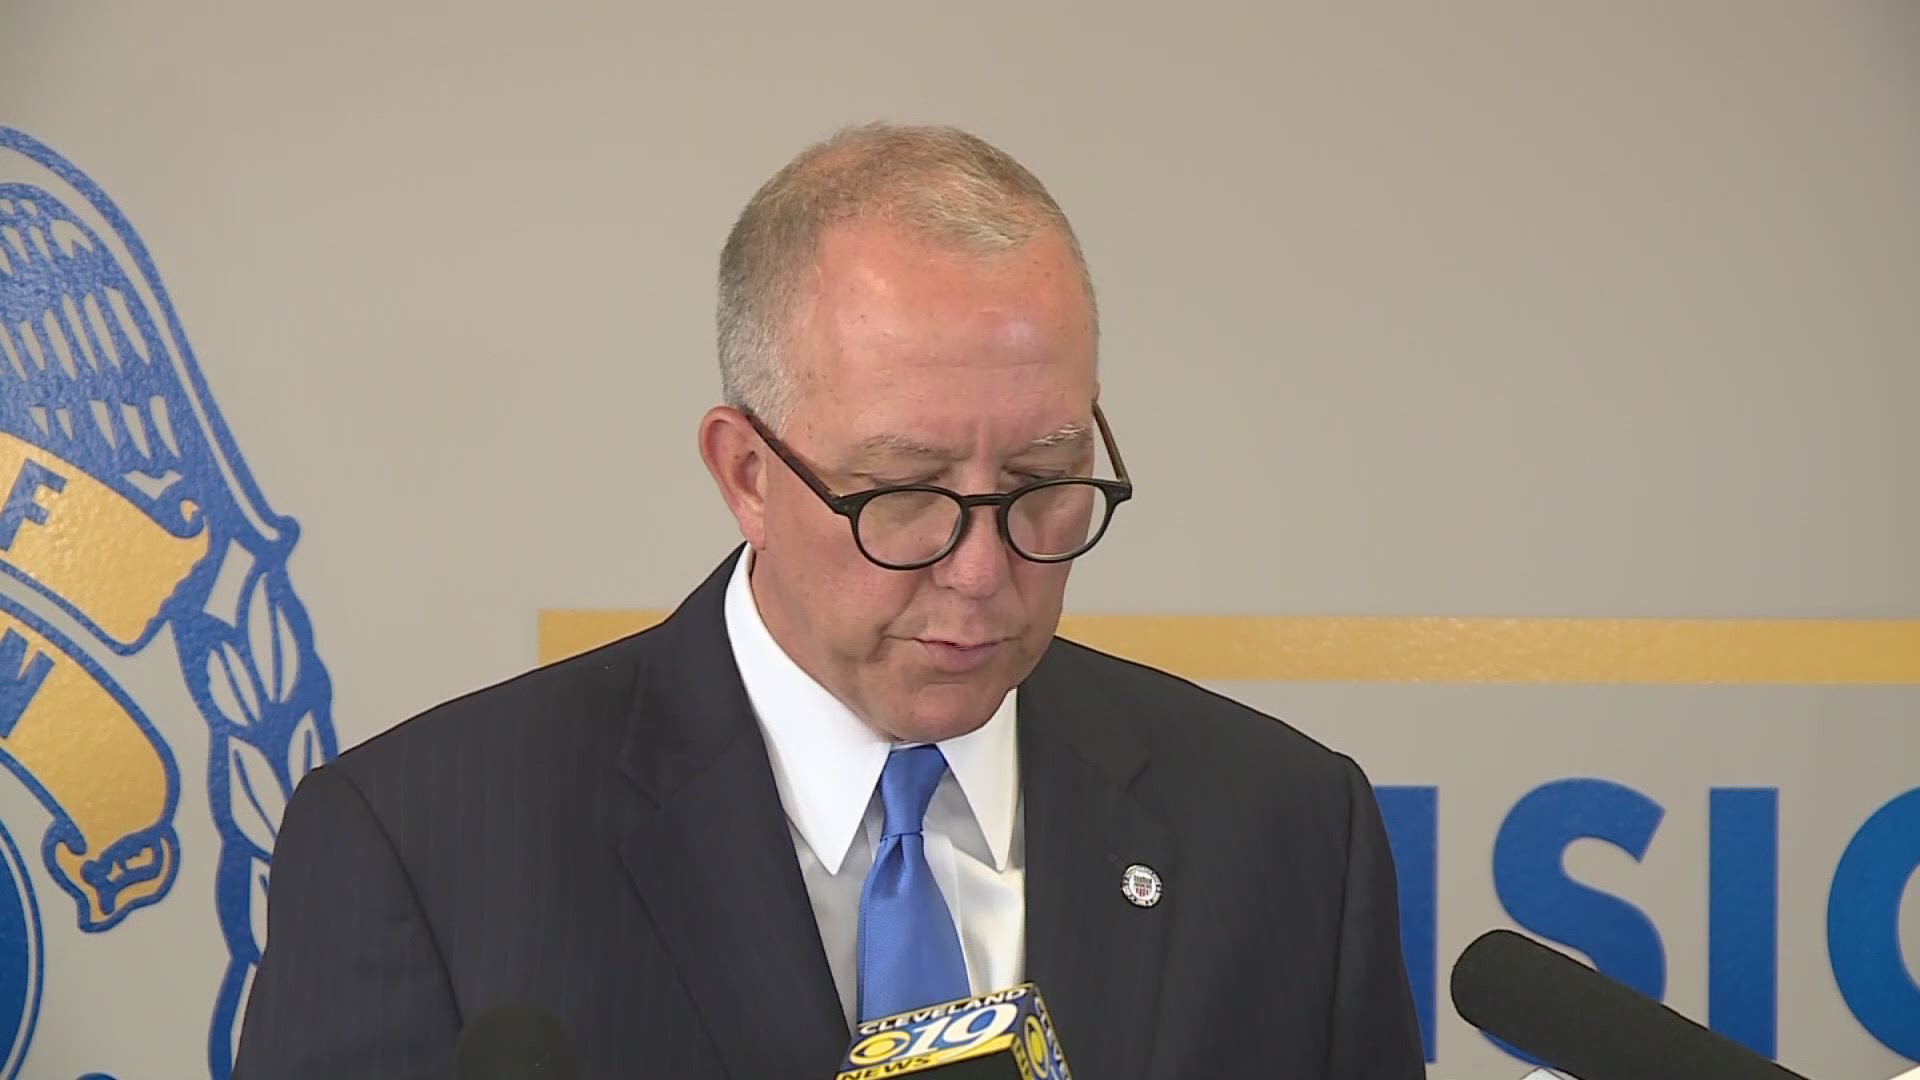 Aug. 28, 2017: Akron Mayor Dan Horrigan discussed his request for the resignation of Police Chief James Nice during a brief press conference Monday afternoon. "Evidence of conduct unbecoming of an officer, inappropriate contact with a city employee and po